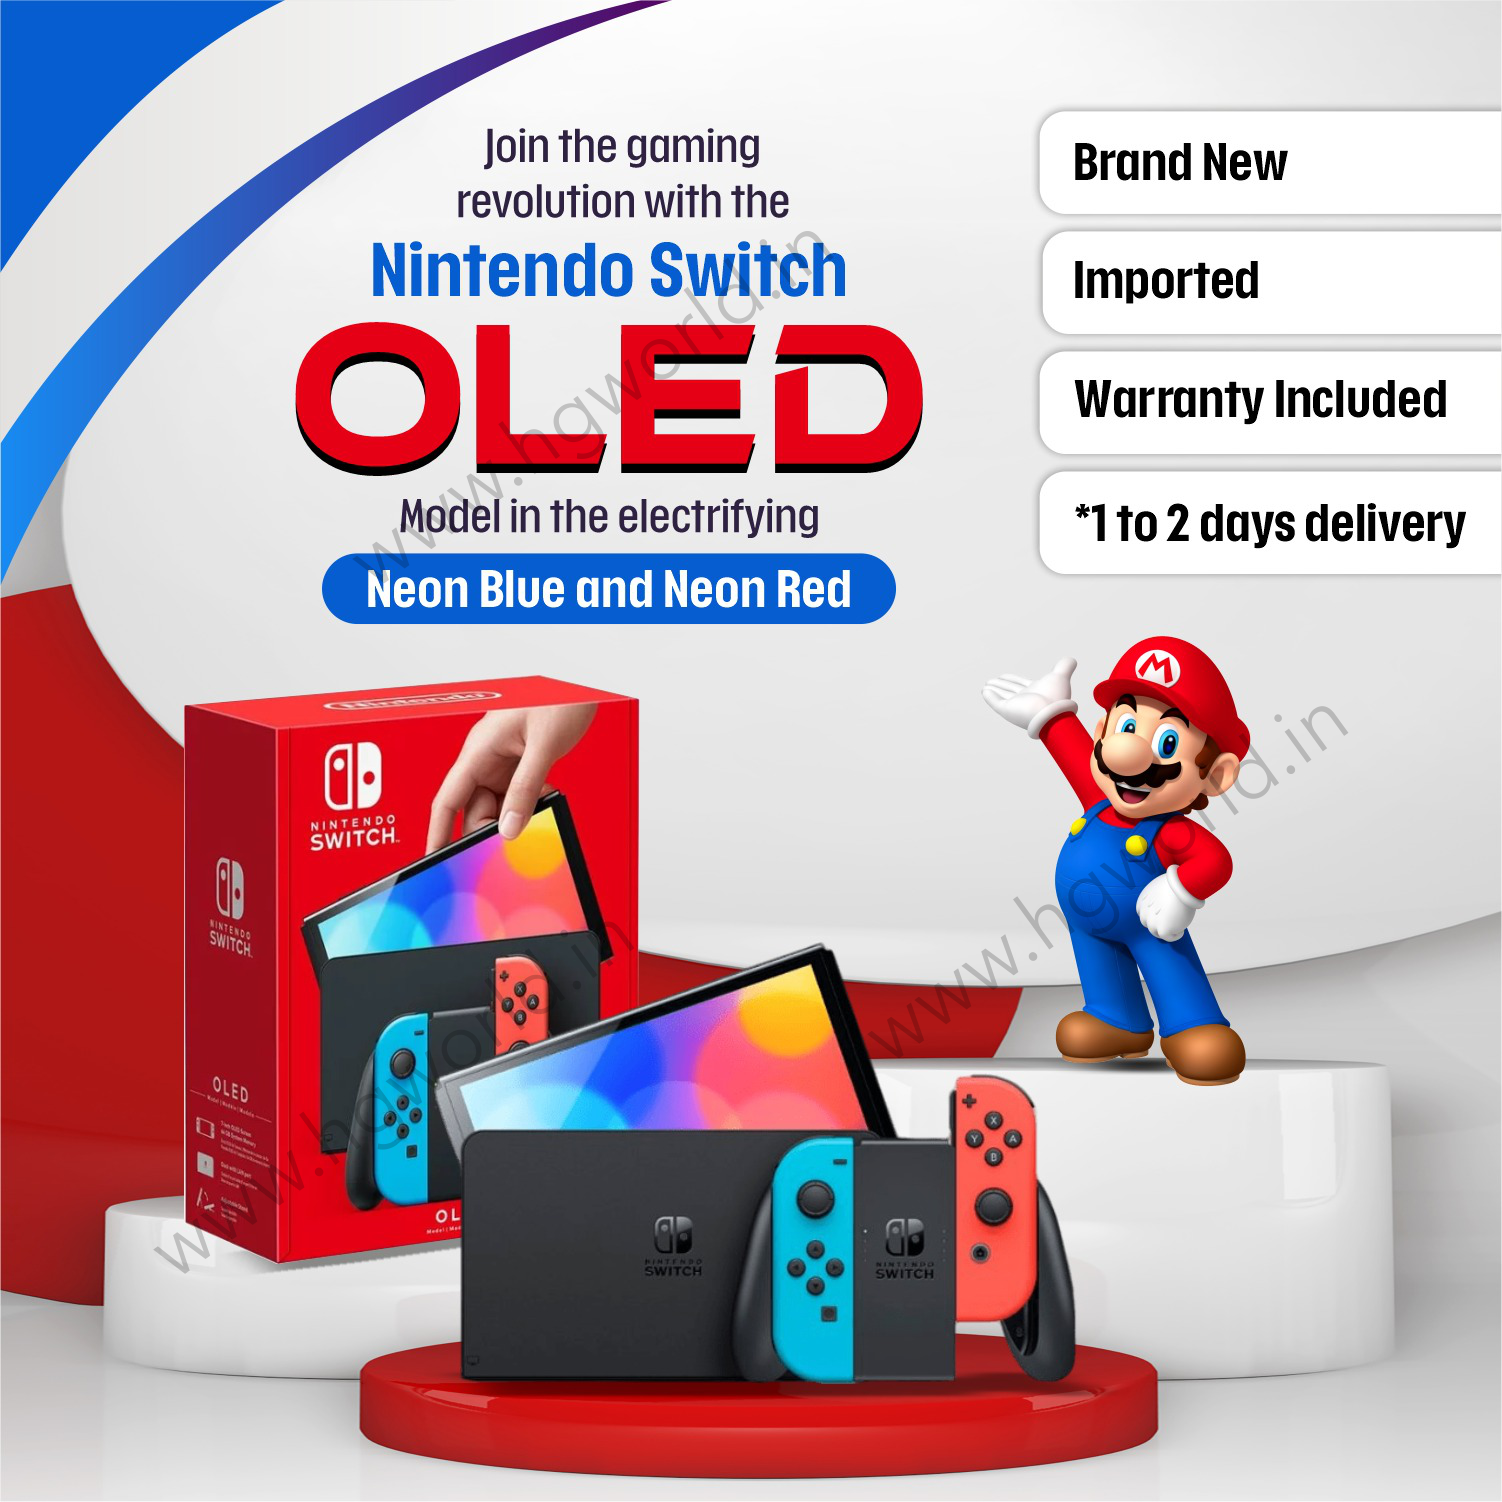 Brand New NINTENDO Switch Oled | 64 GB | Neon Blue & Red Edition | Handheld  Portable Gaming Console | Company Seal Pack | All Standard Accessories | 